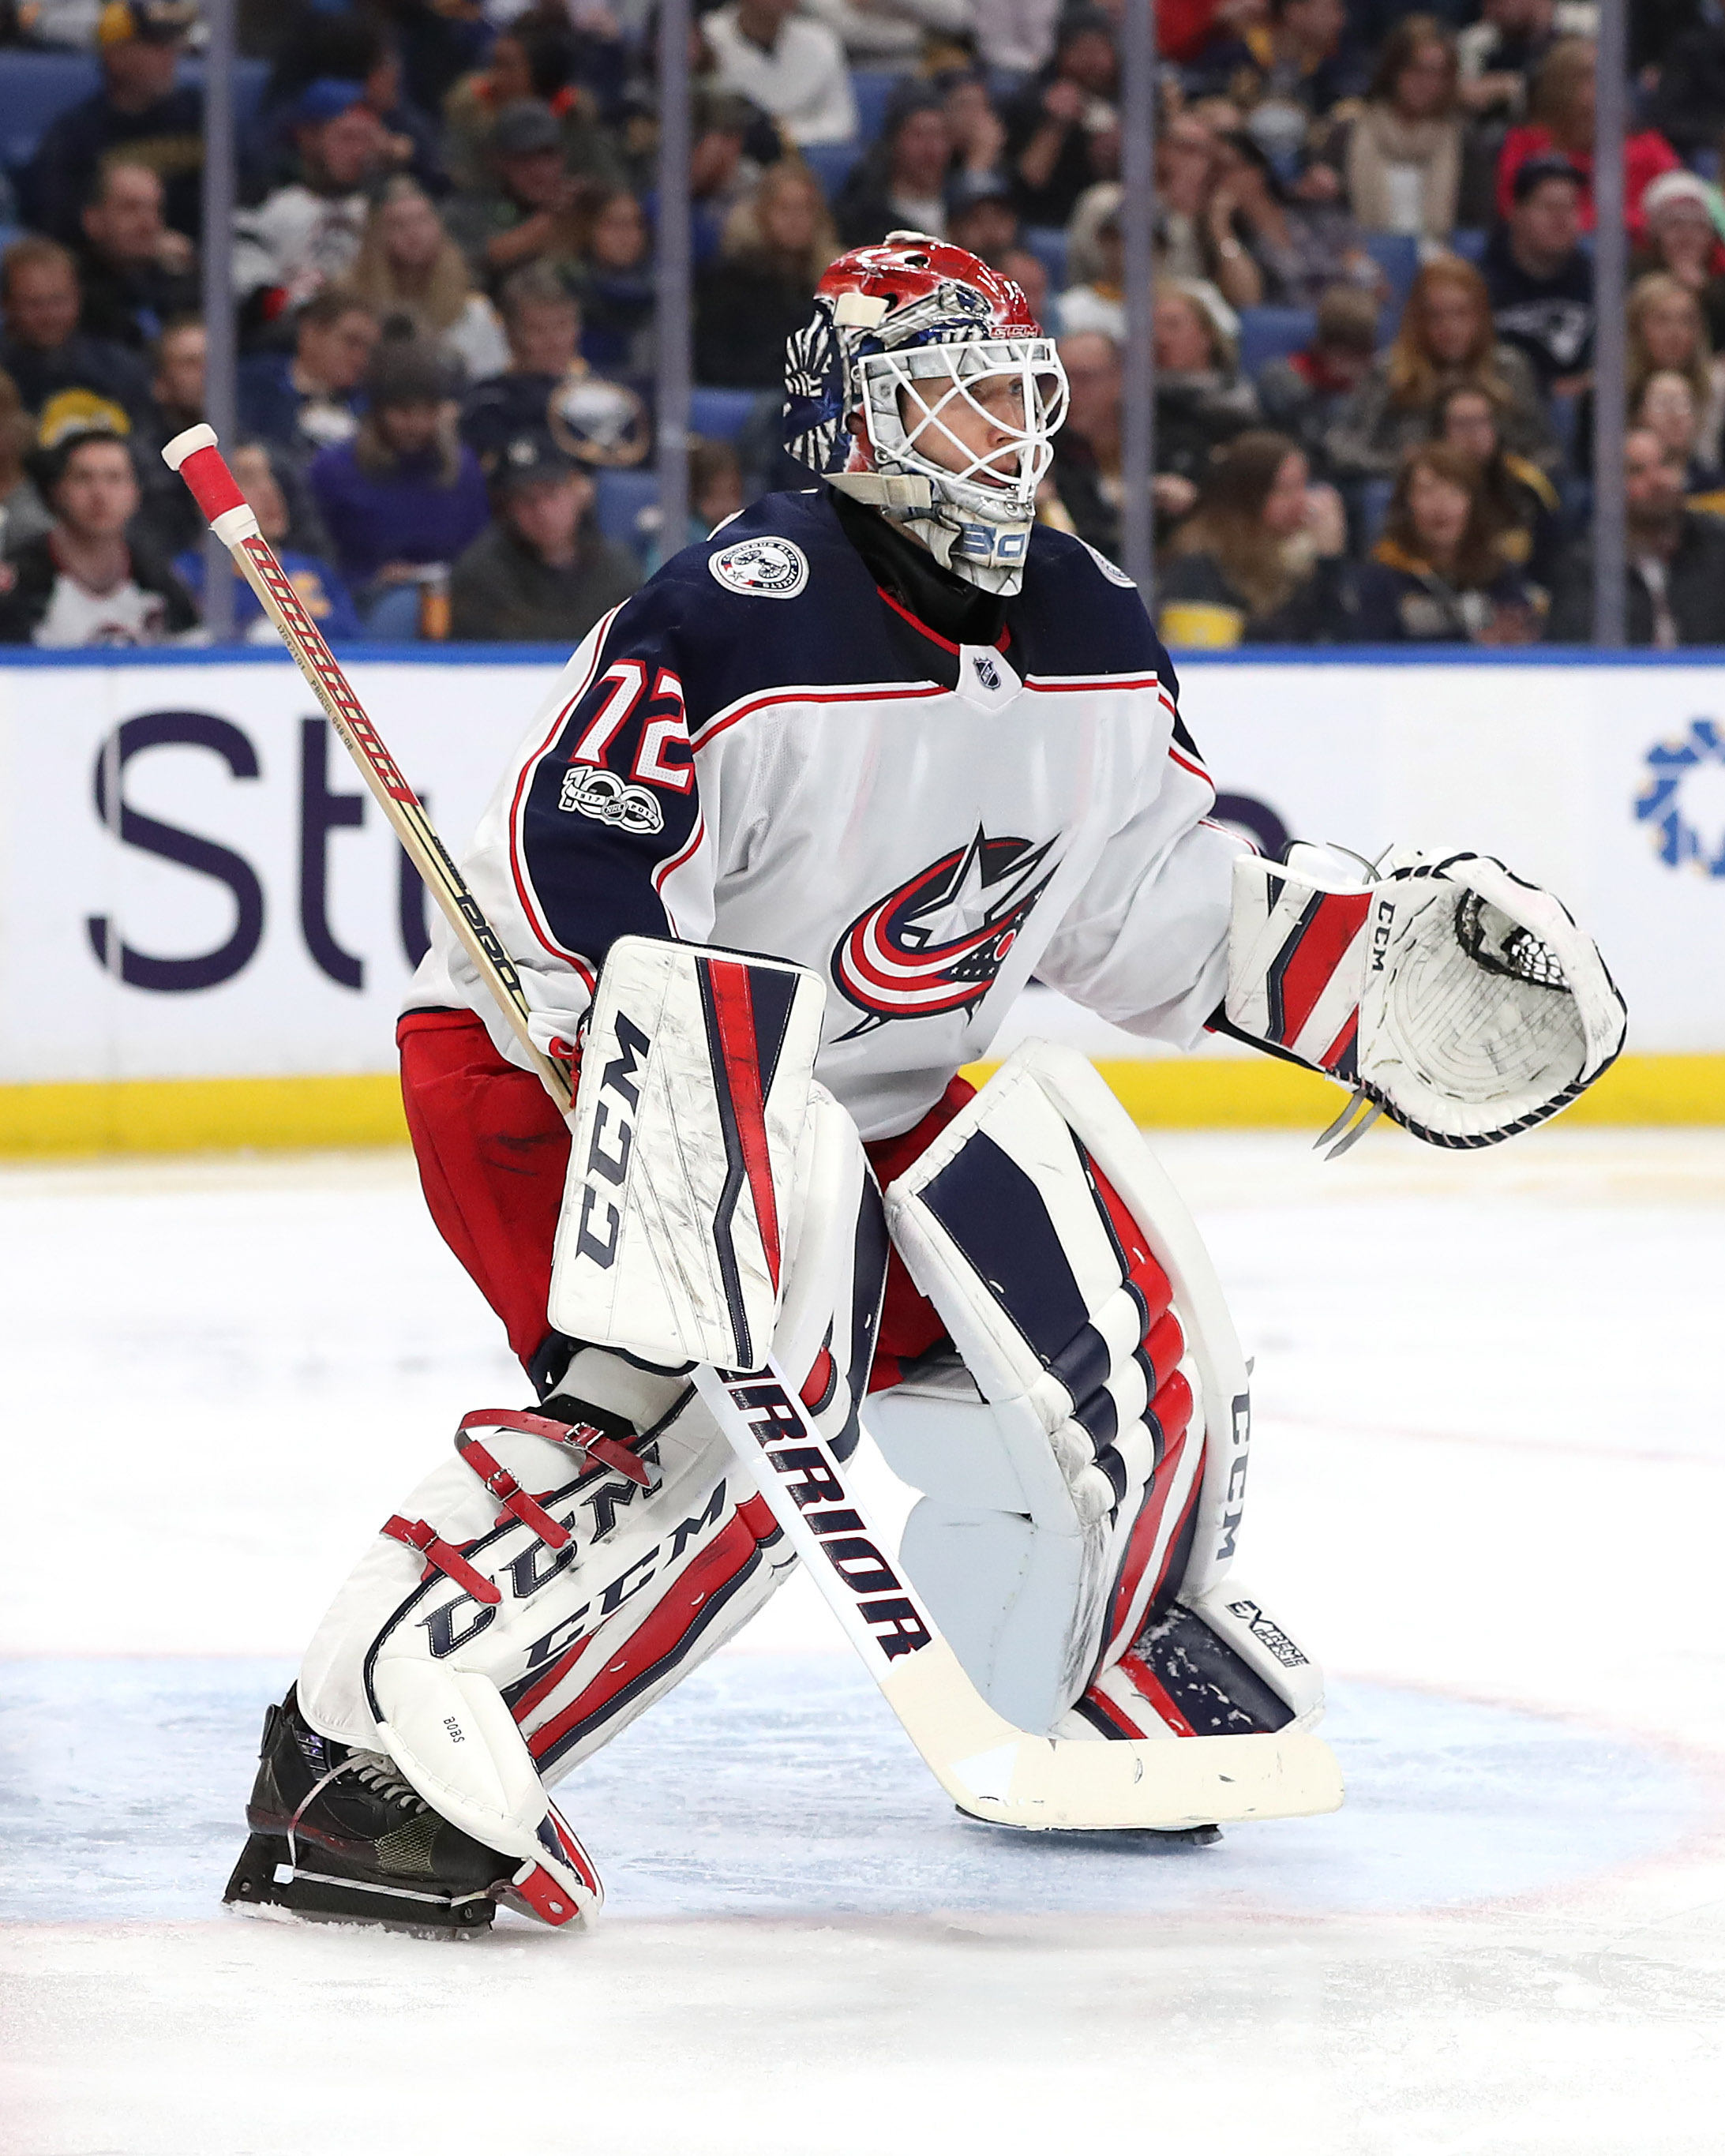 TRAIKOS: When will Sergei Bobrovsky start playing up to his